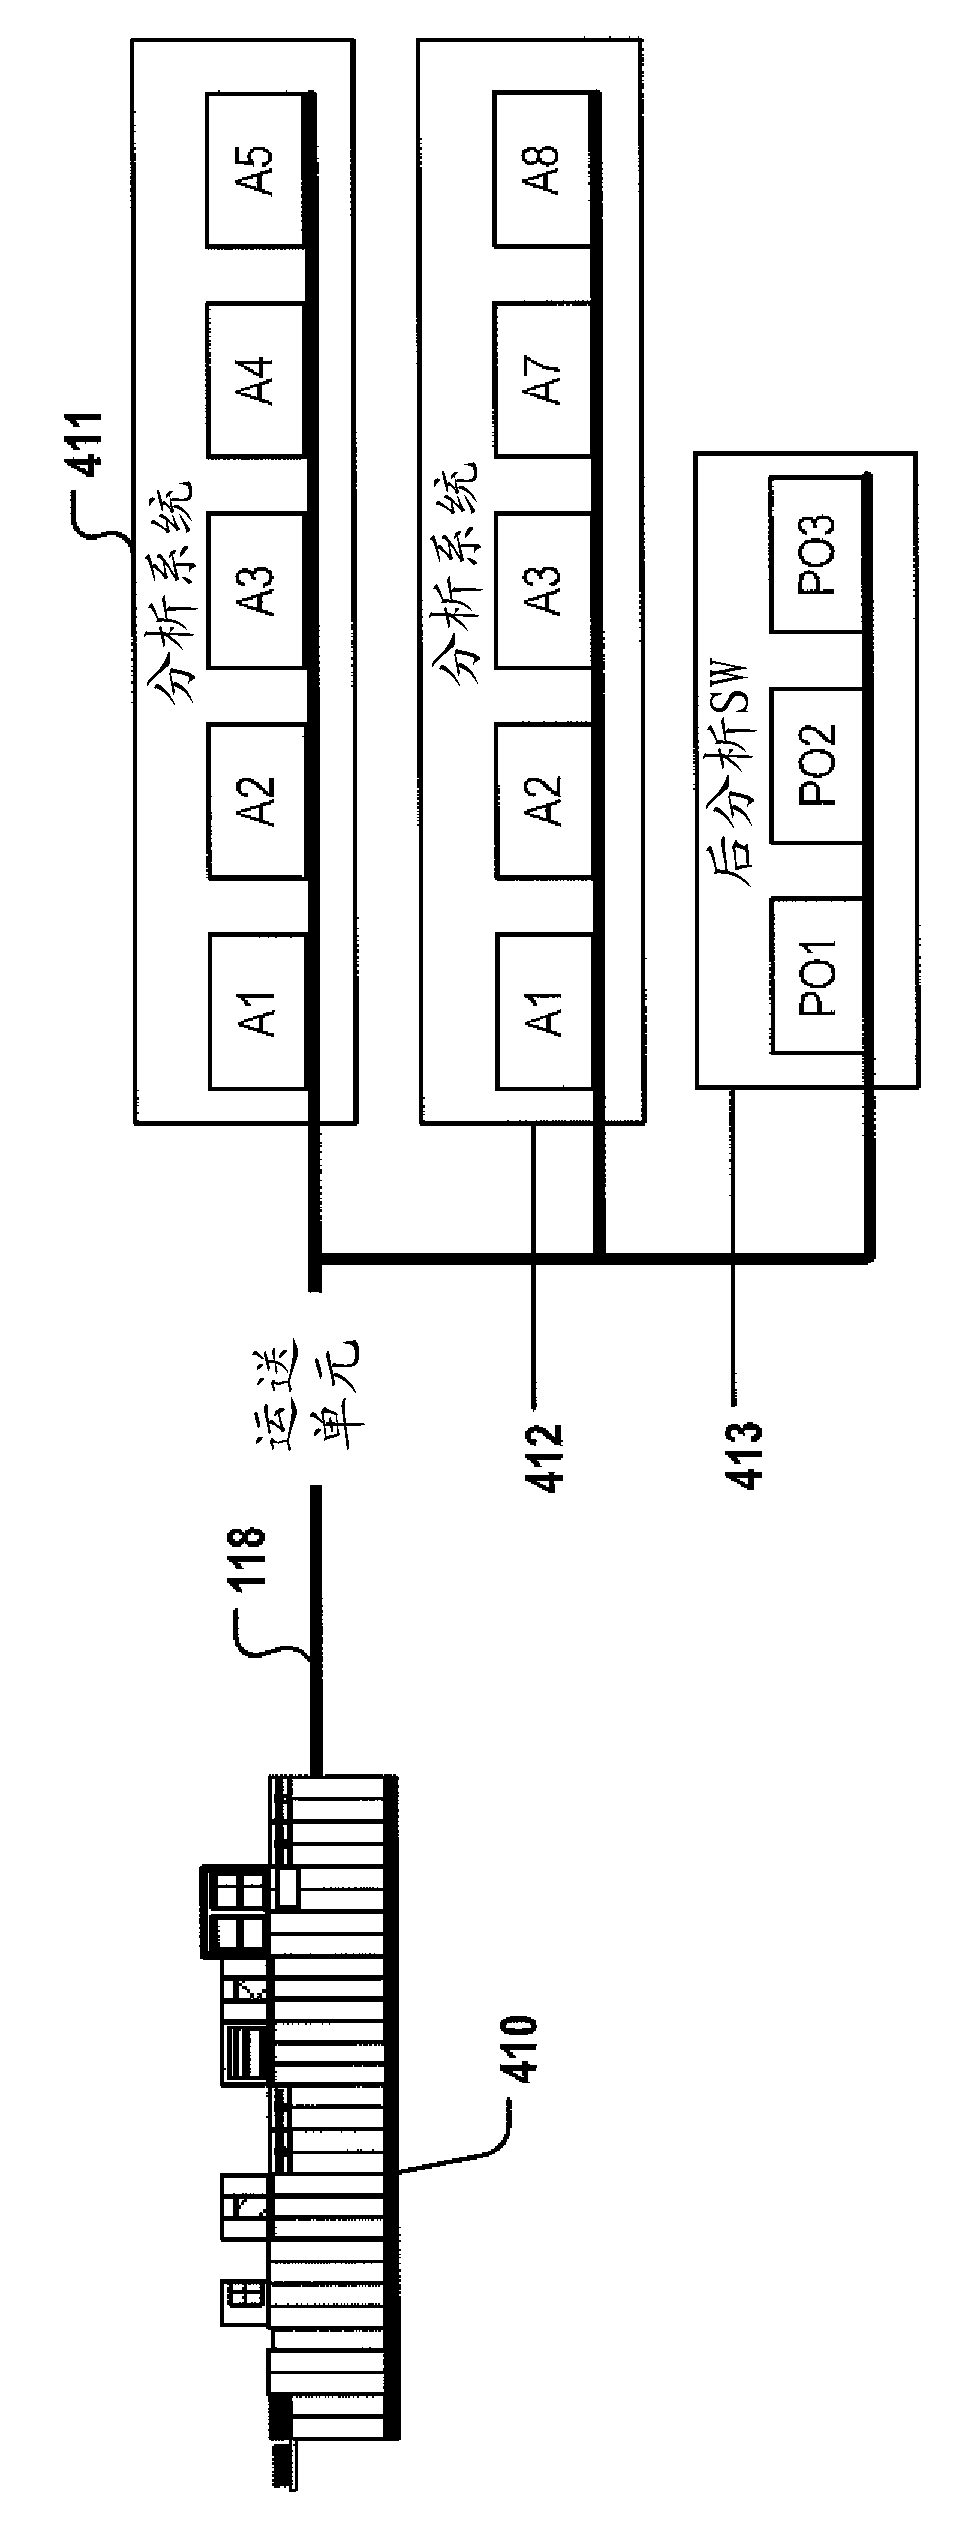 Method for operating automated sample workcell